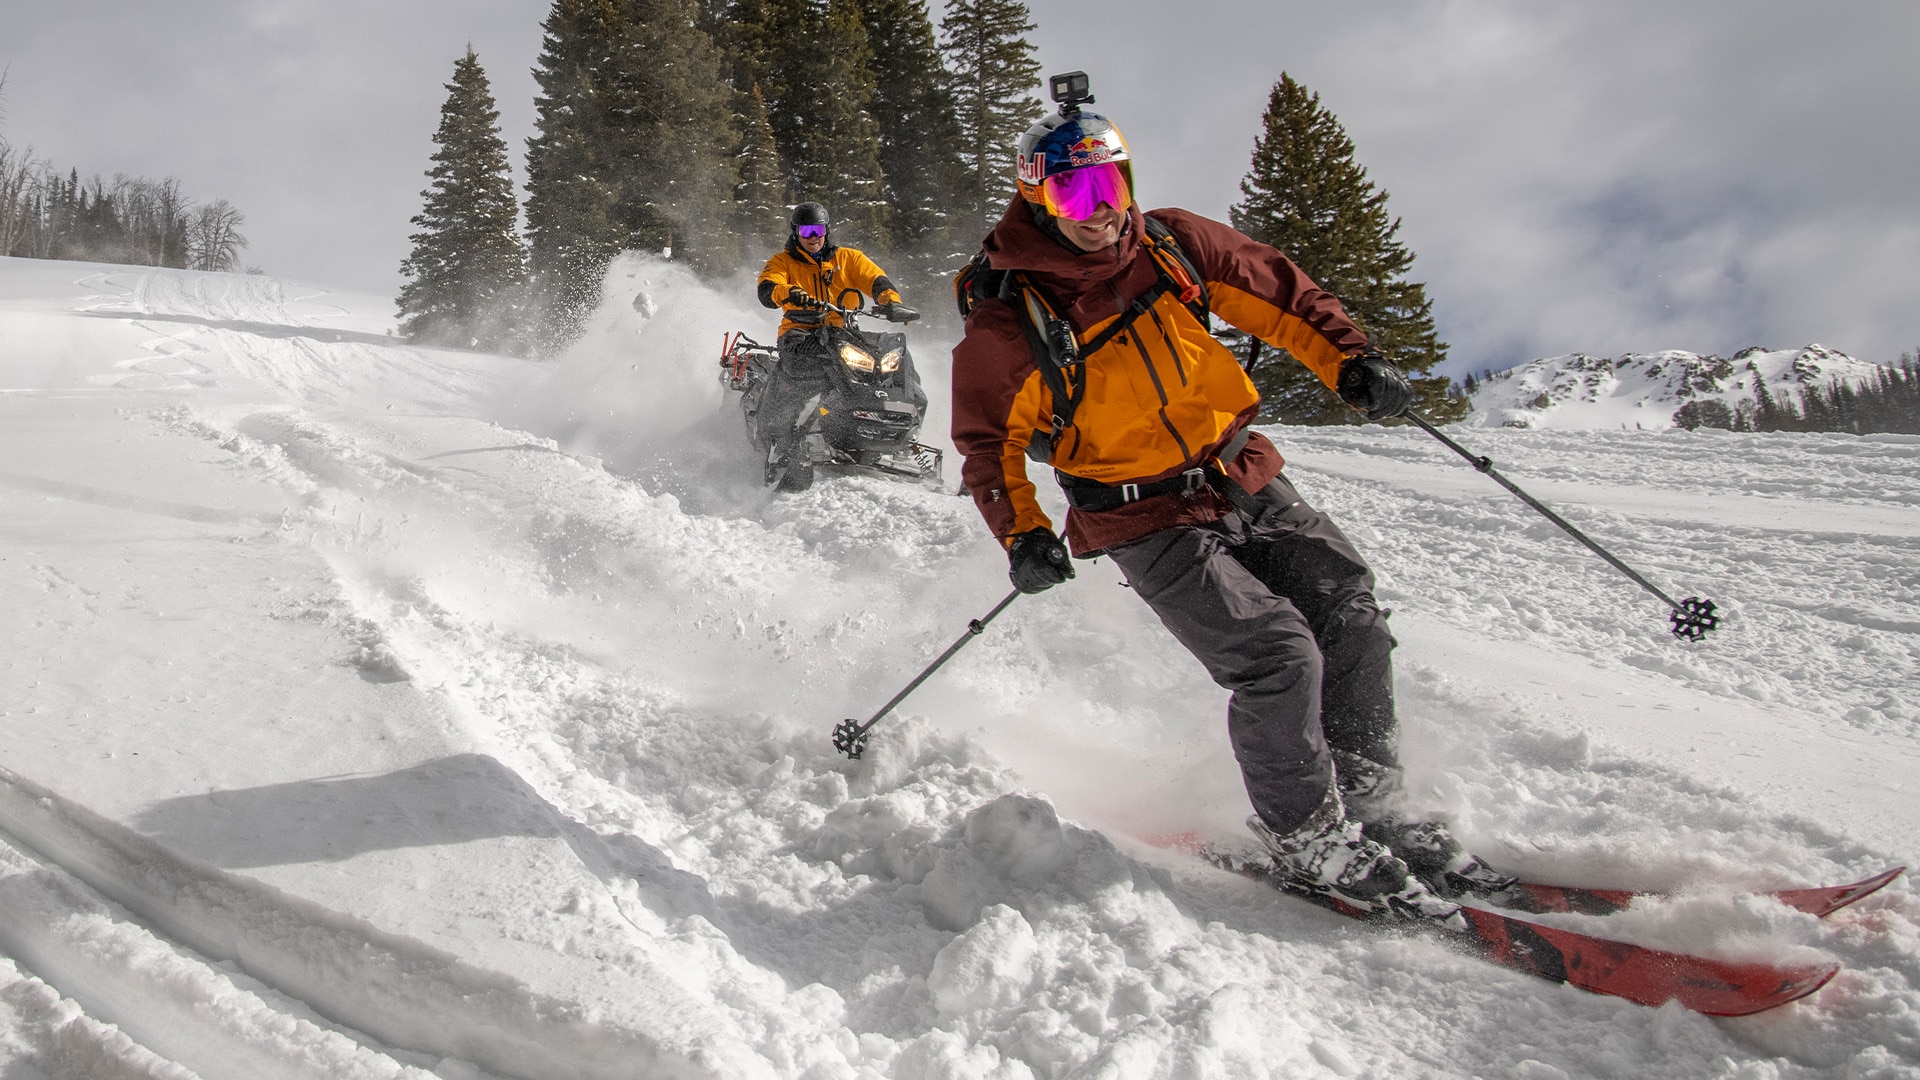 Ski-Doo riders and a skier on a mountain